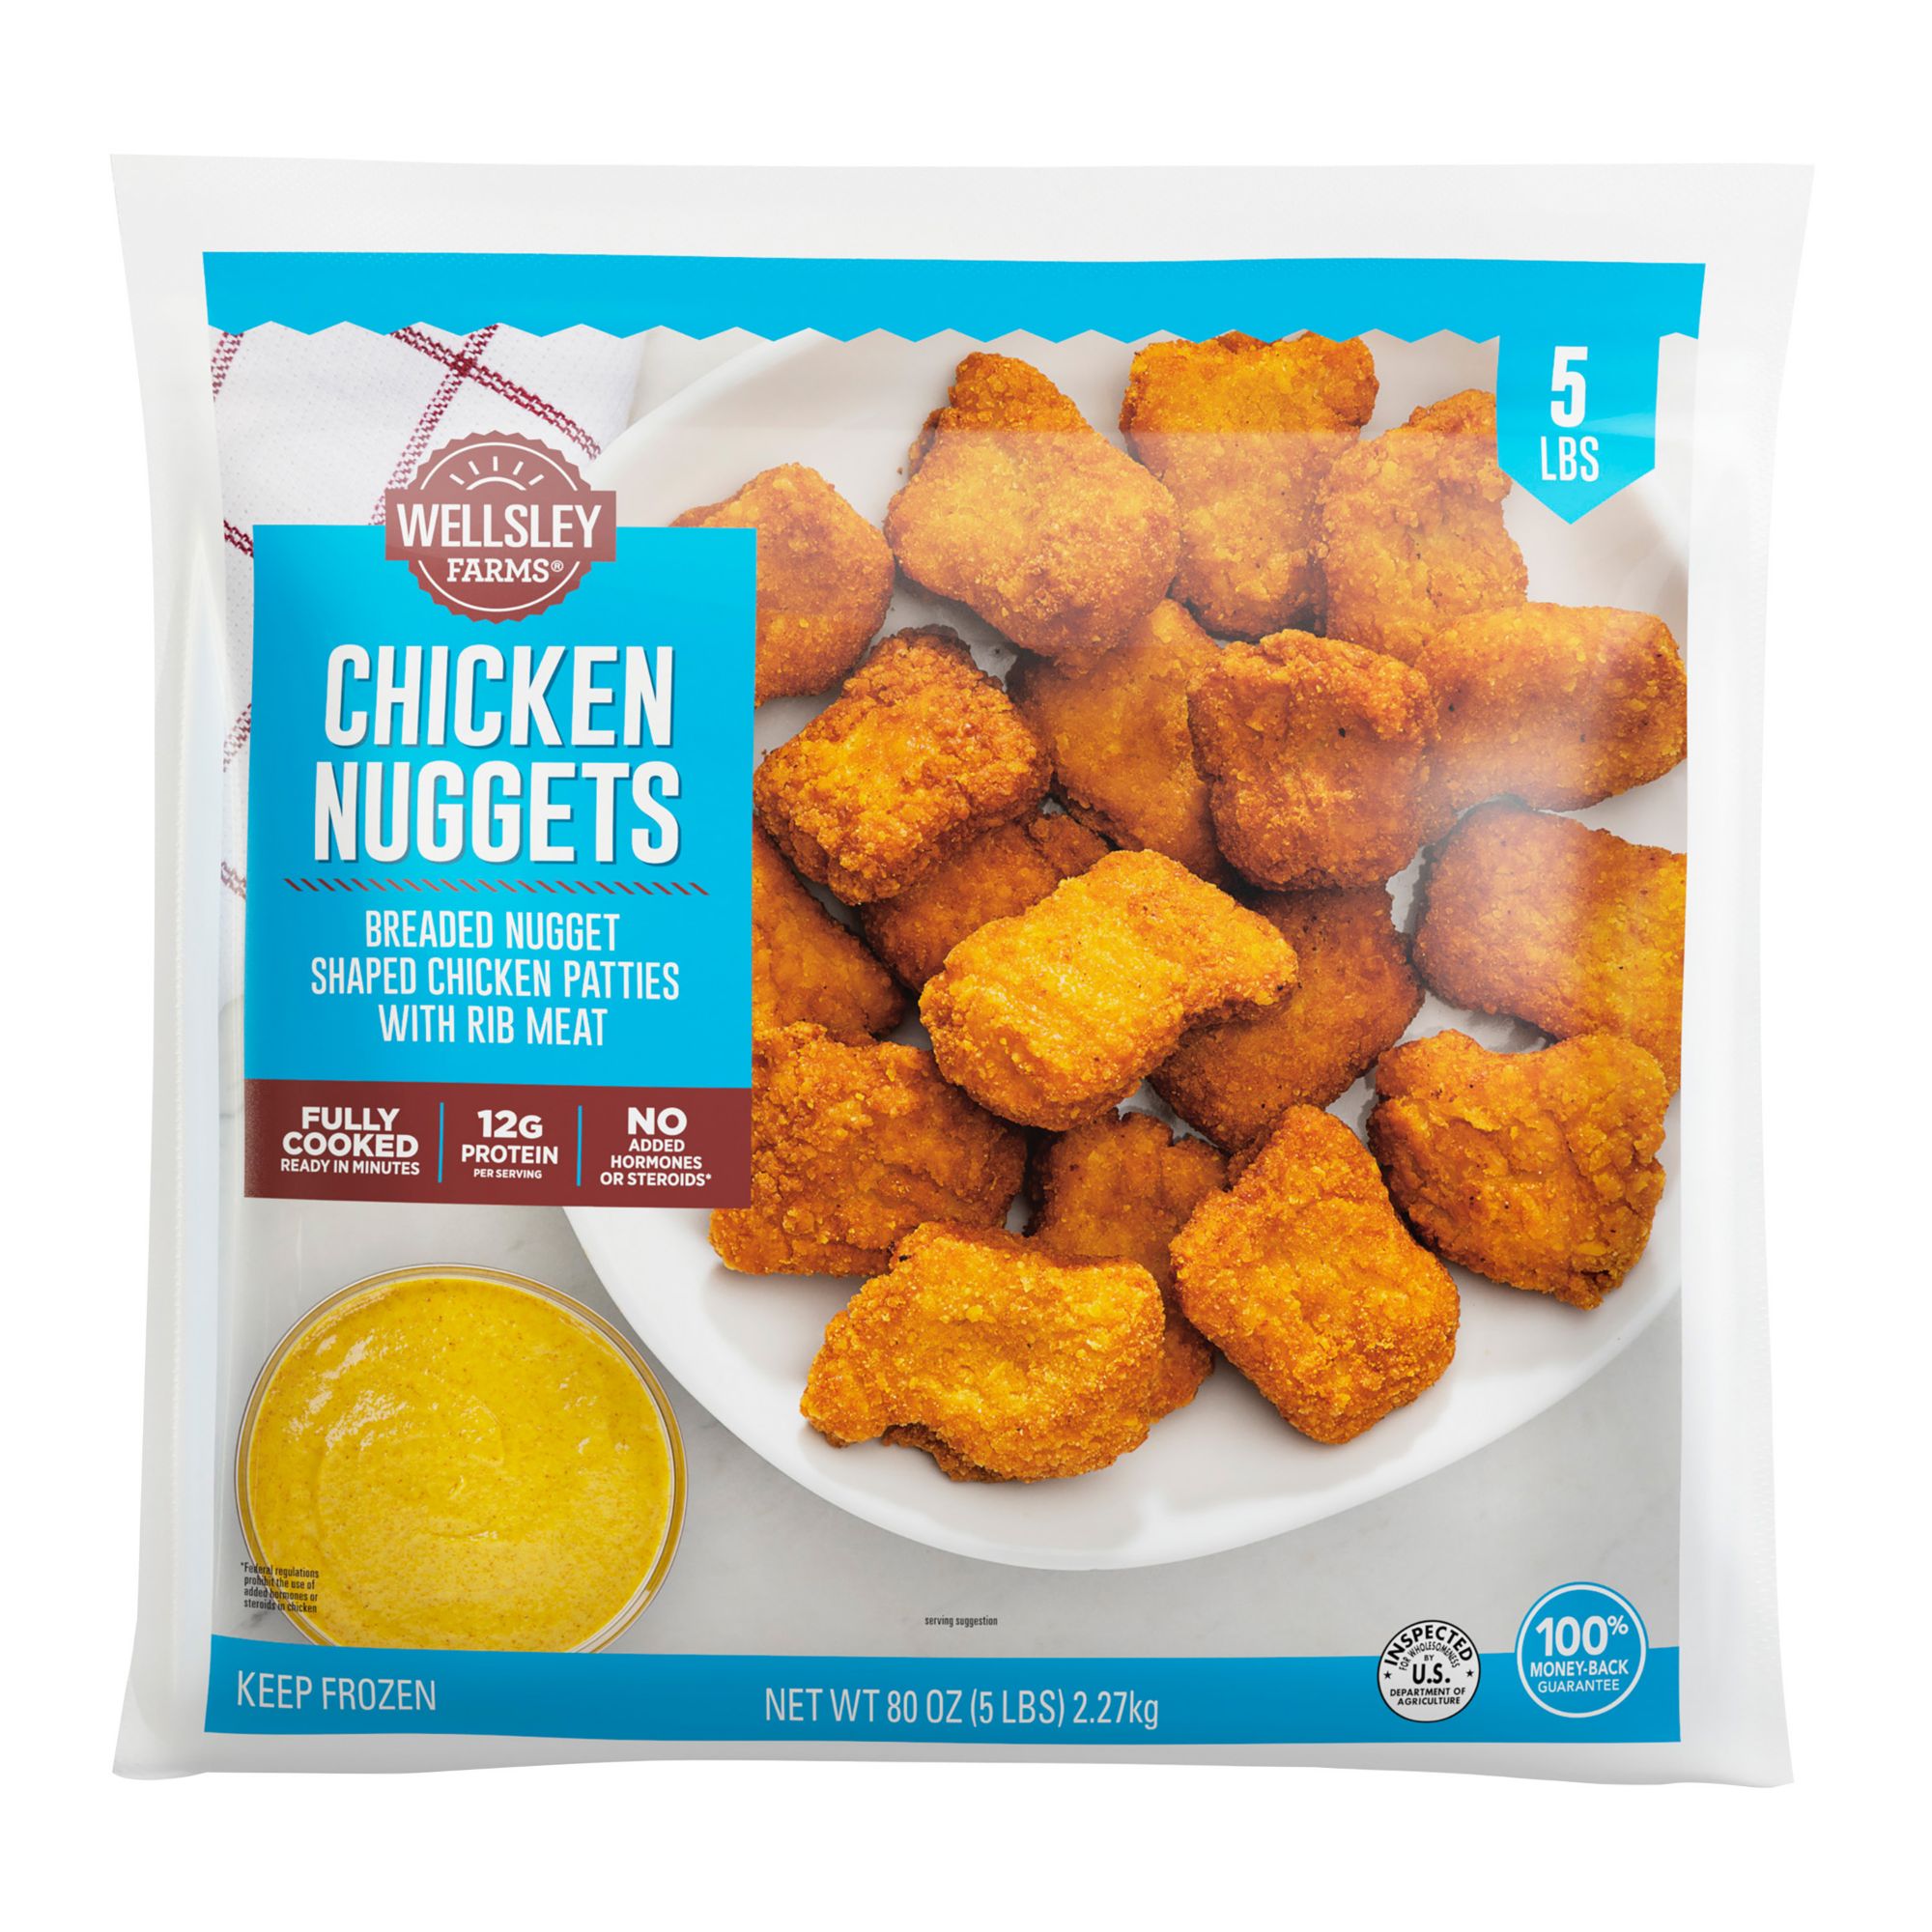 Great Value Fully Cooked Gluten-Free Chicken Breast Nuggets, 16 oz (Frozen)